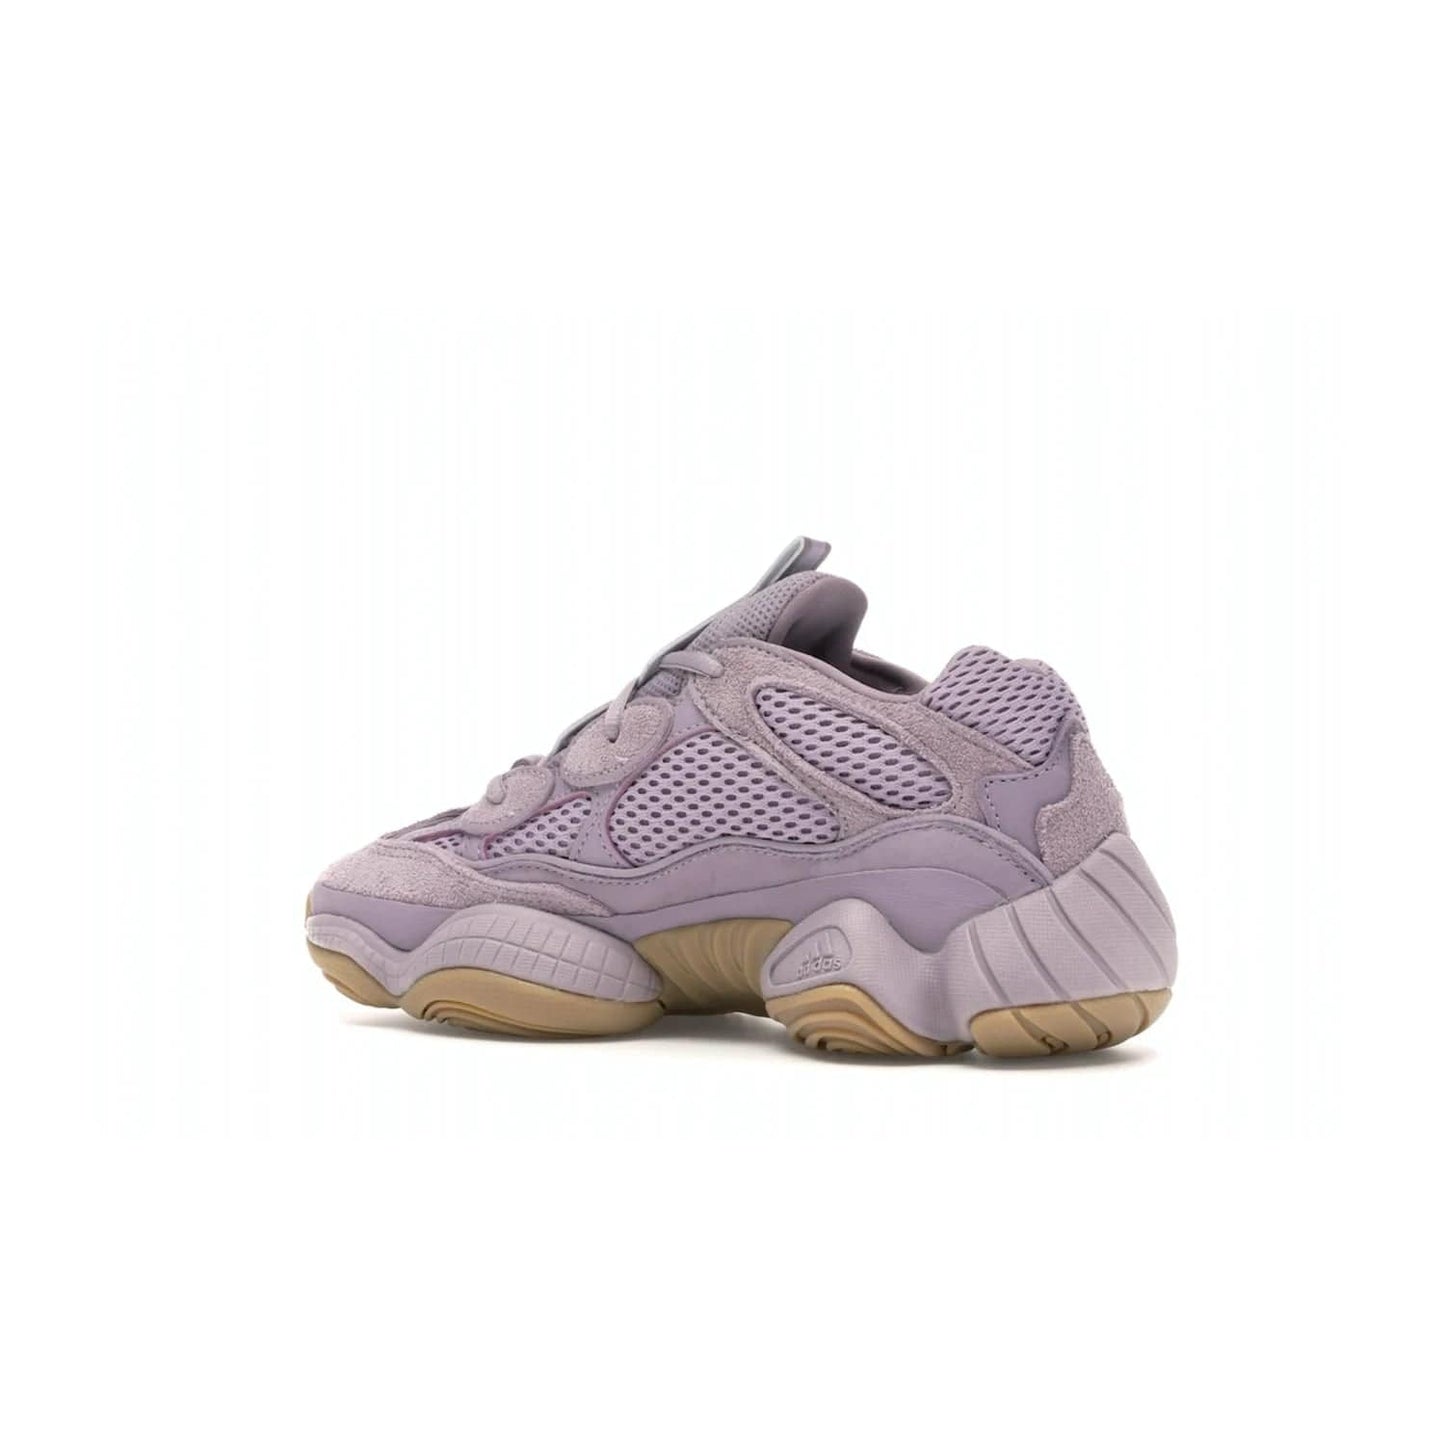 adidas Yeezy 500 Soft Vision - Image 22 - Only at www.BallersClubKickz.com - New adidas Yeezy 500 Soft Vision sneaker featuring a combination of mesh, leather, and suede in a classic Soft Vision colorway. Gum rubber outsole ensures durability and traction. An everyday sneaker that stands out from the crowd.